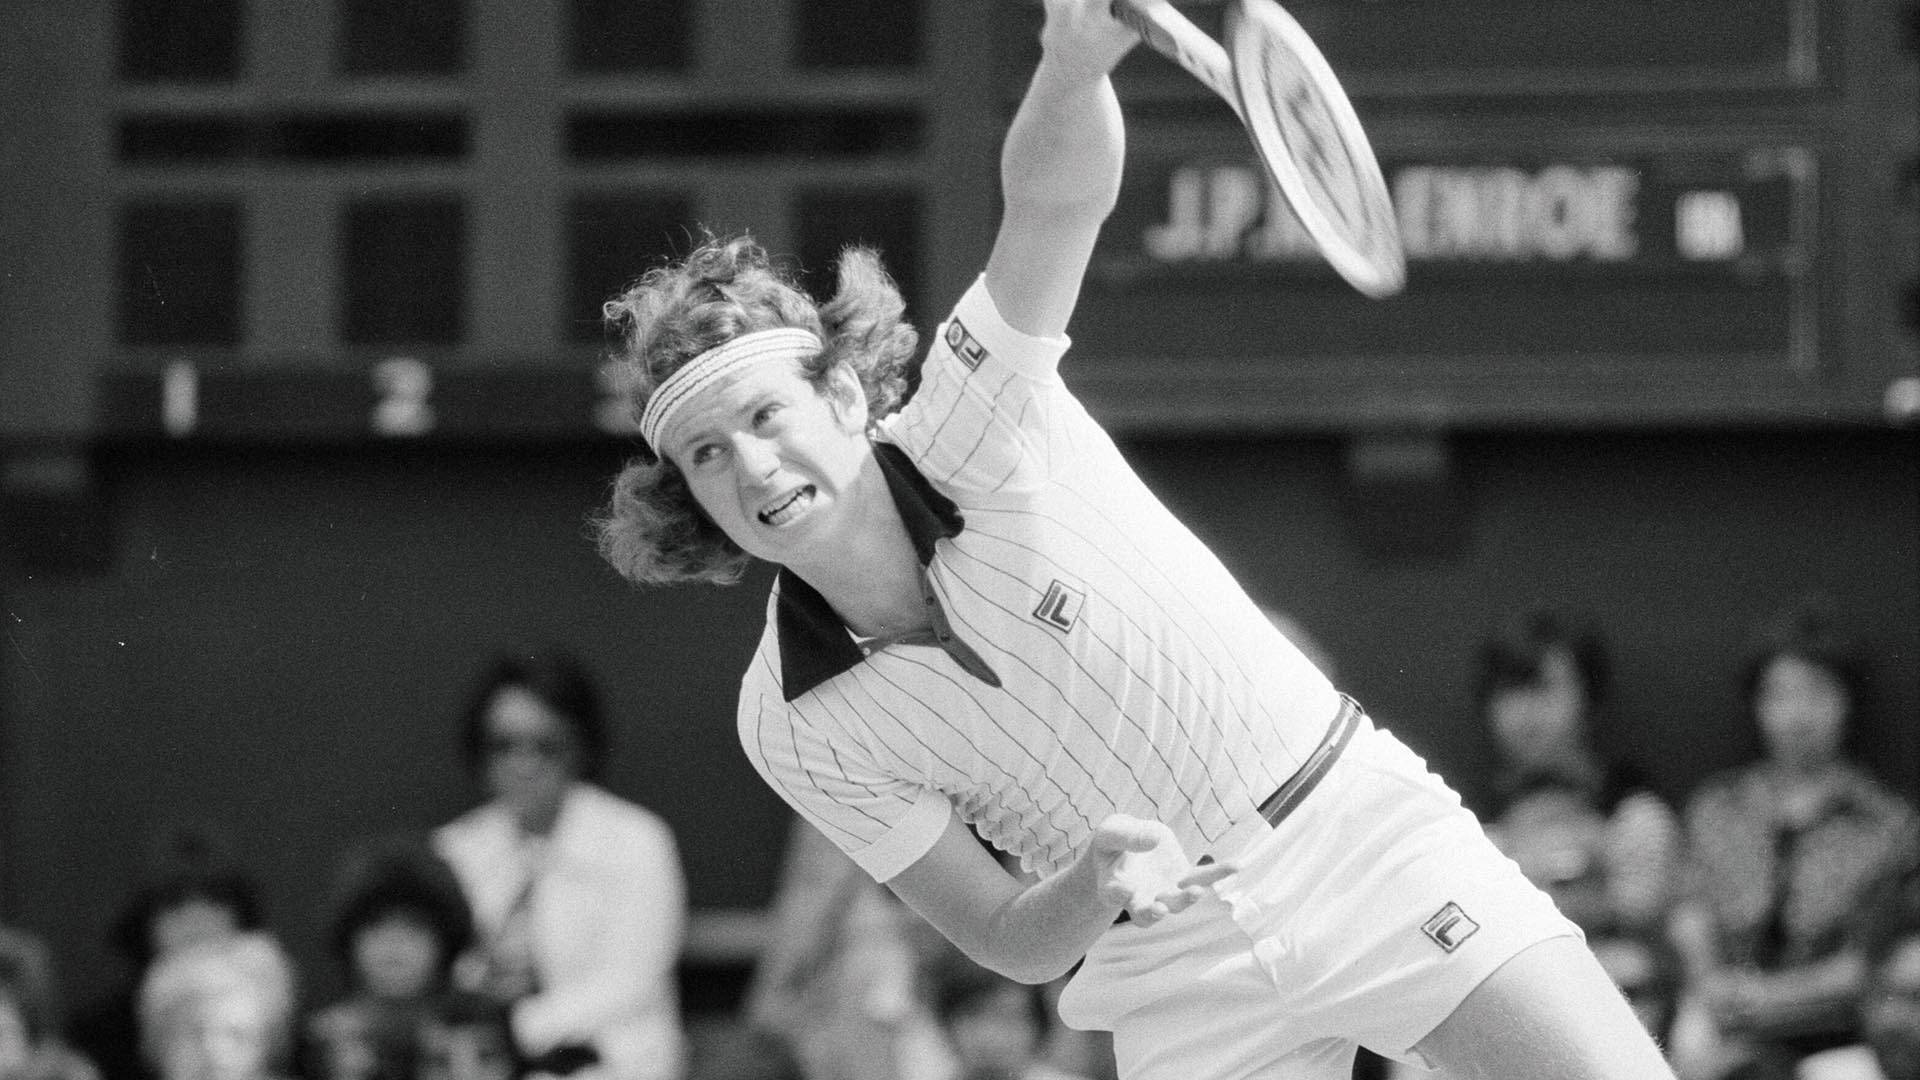 Jimmy Connors in Action - Wimbledon 1977 Wallpaper